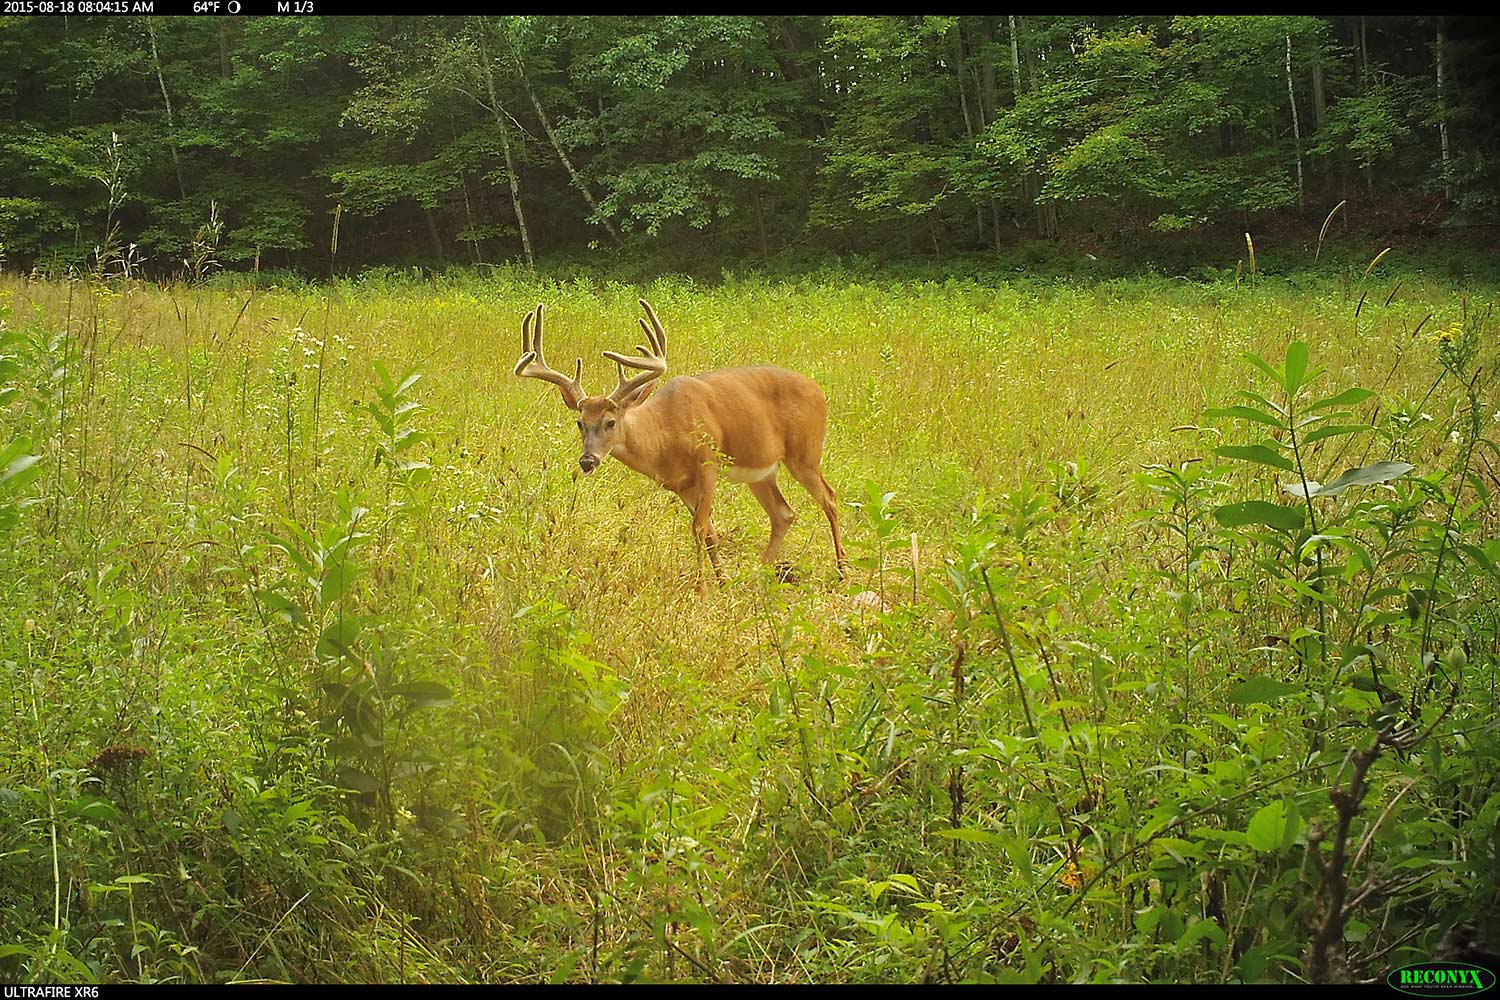 trail camera footage of a deer with full velvet antlers